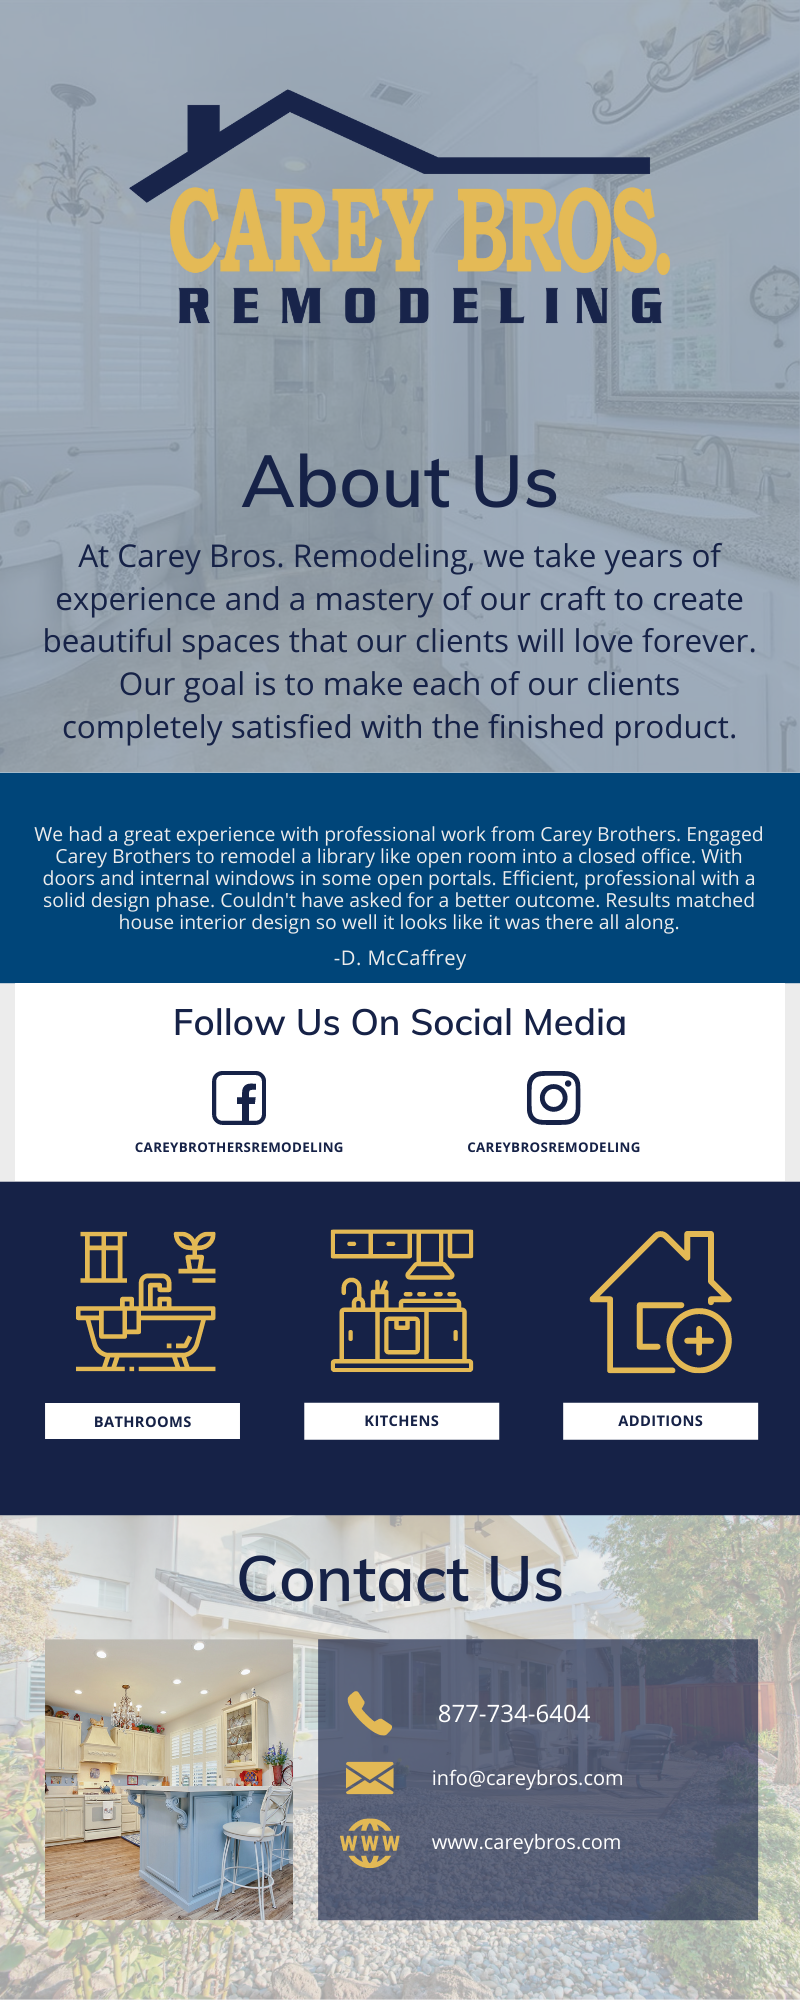 Carey Bros. Remodeling Infographic